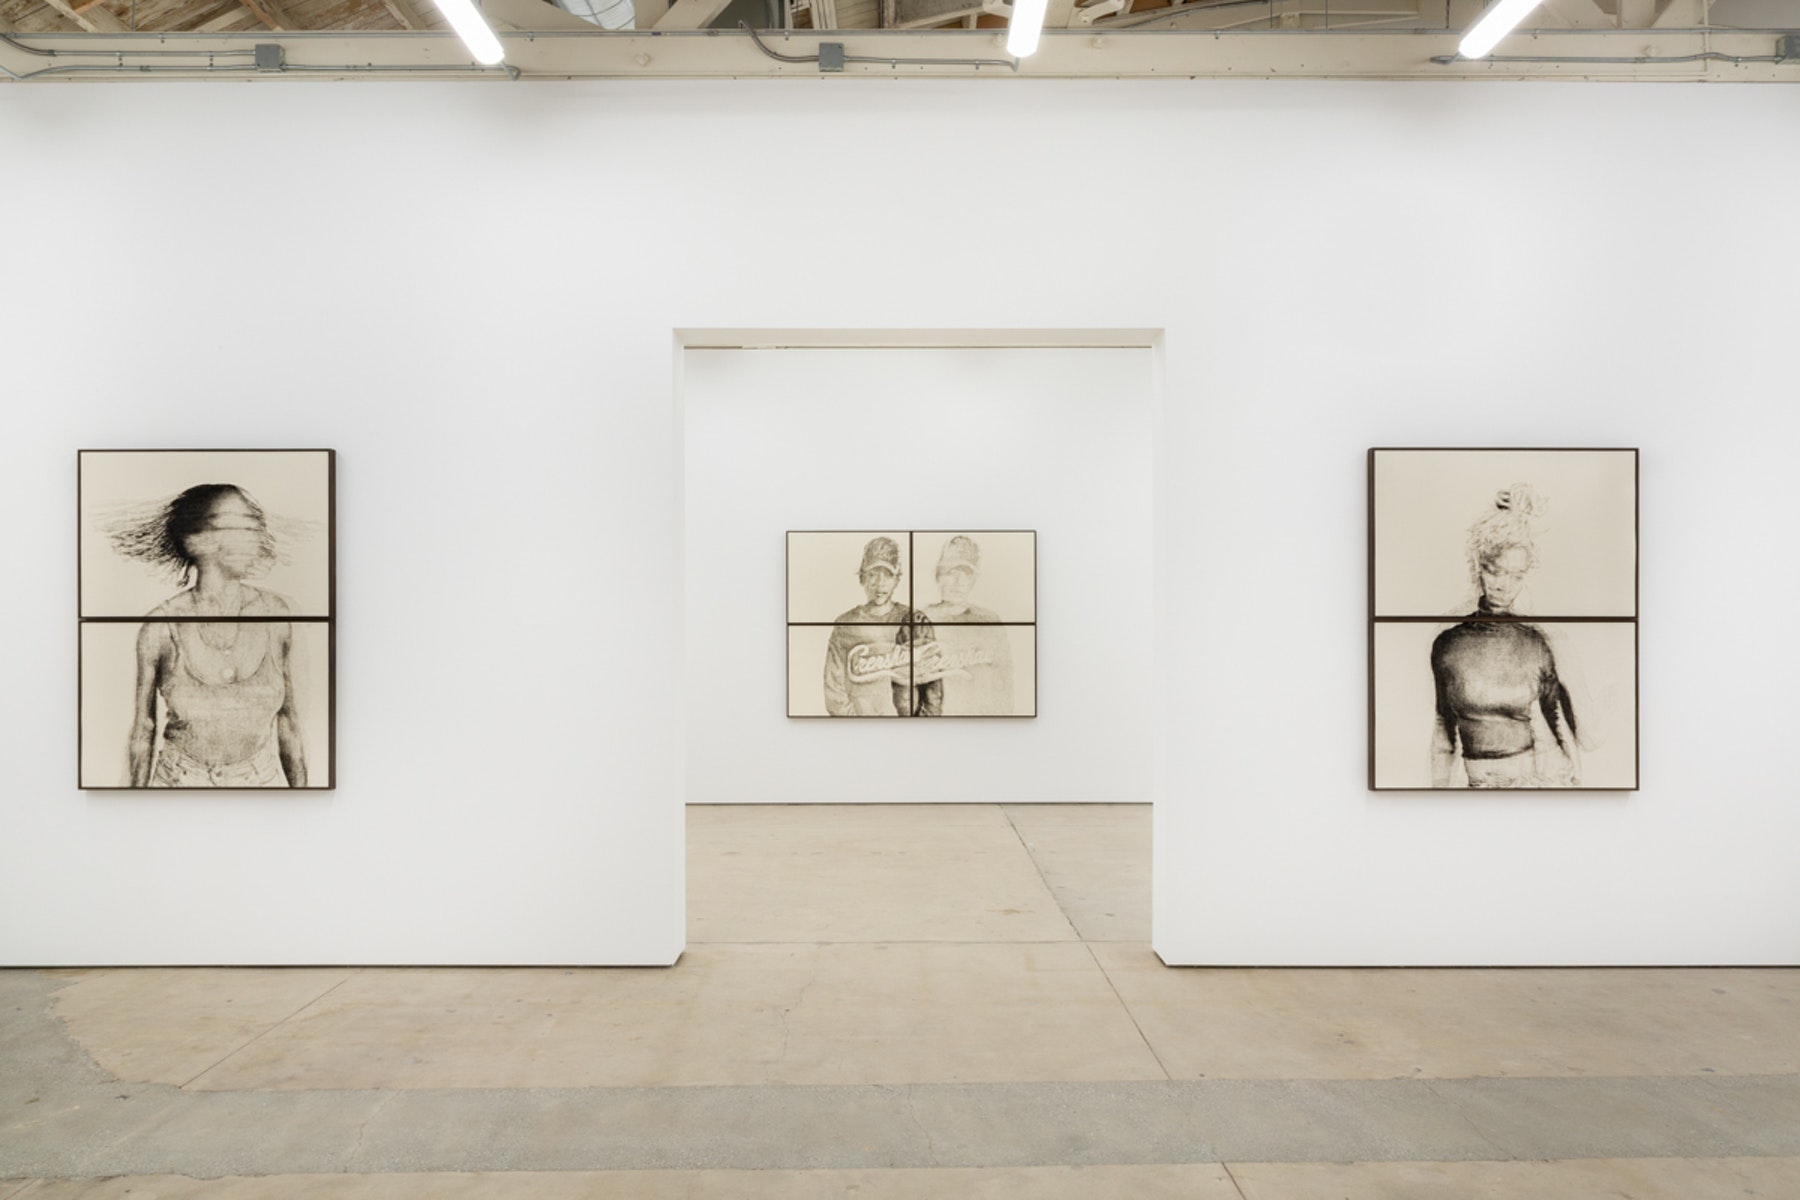 Installation view of Blur in the Interest of Precision by Kenturah Davis at Matthew Brown, Los Angeles. 26 January - 2 March 2019. Courtesy of the Artist and Matthew Brown, Los Angeles.